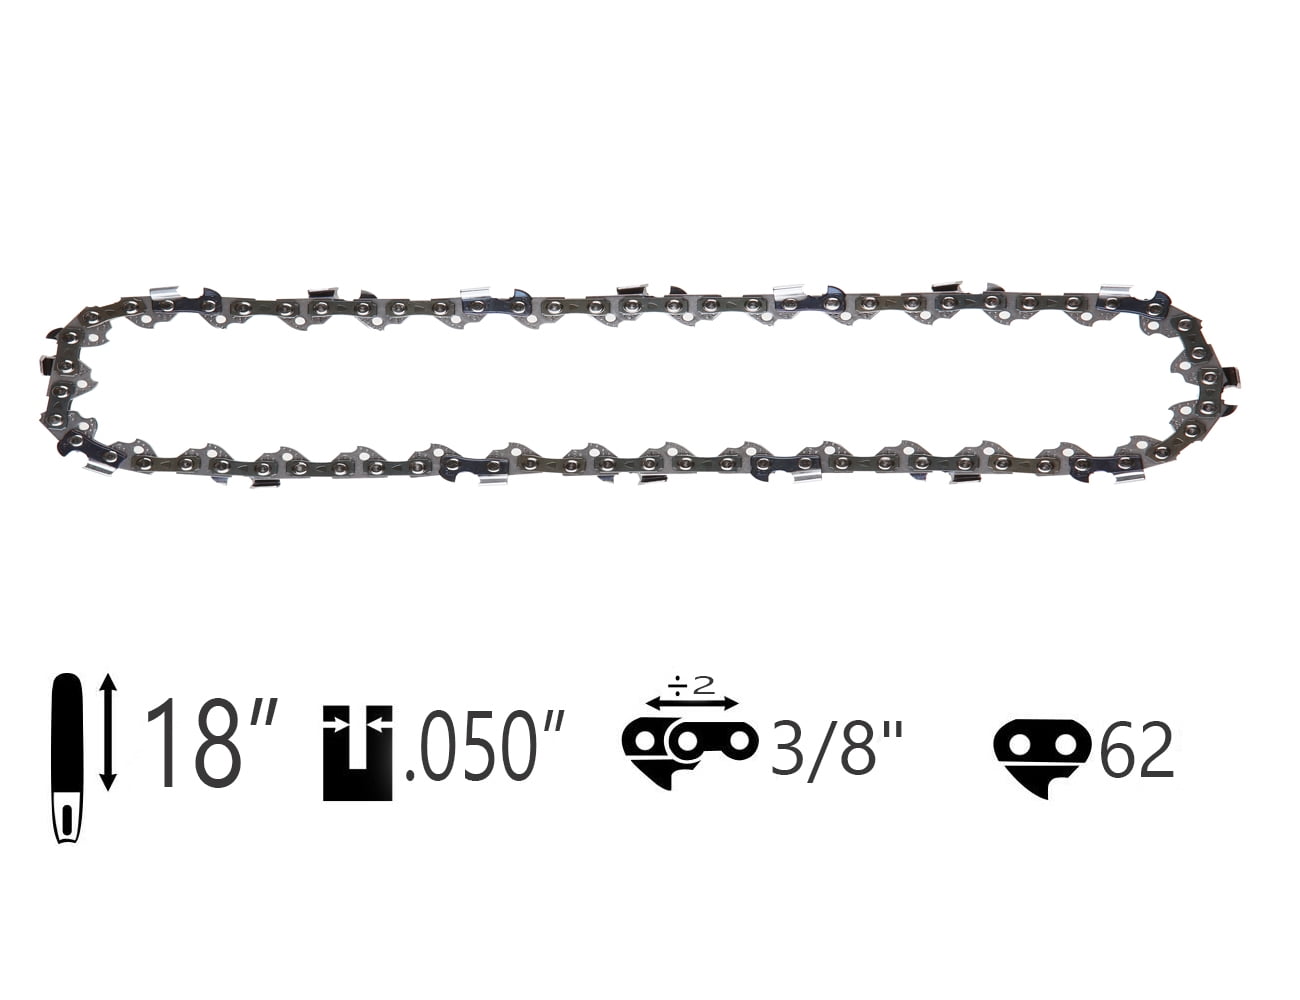 Chainsaw Chain 3/8 LP Pitch .050 Gauge 52 DL Drive Links 